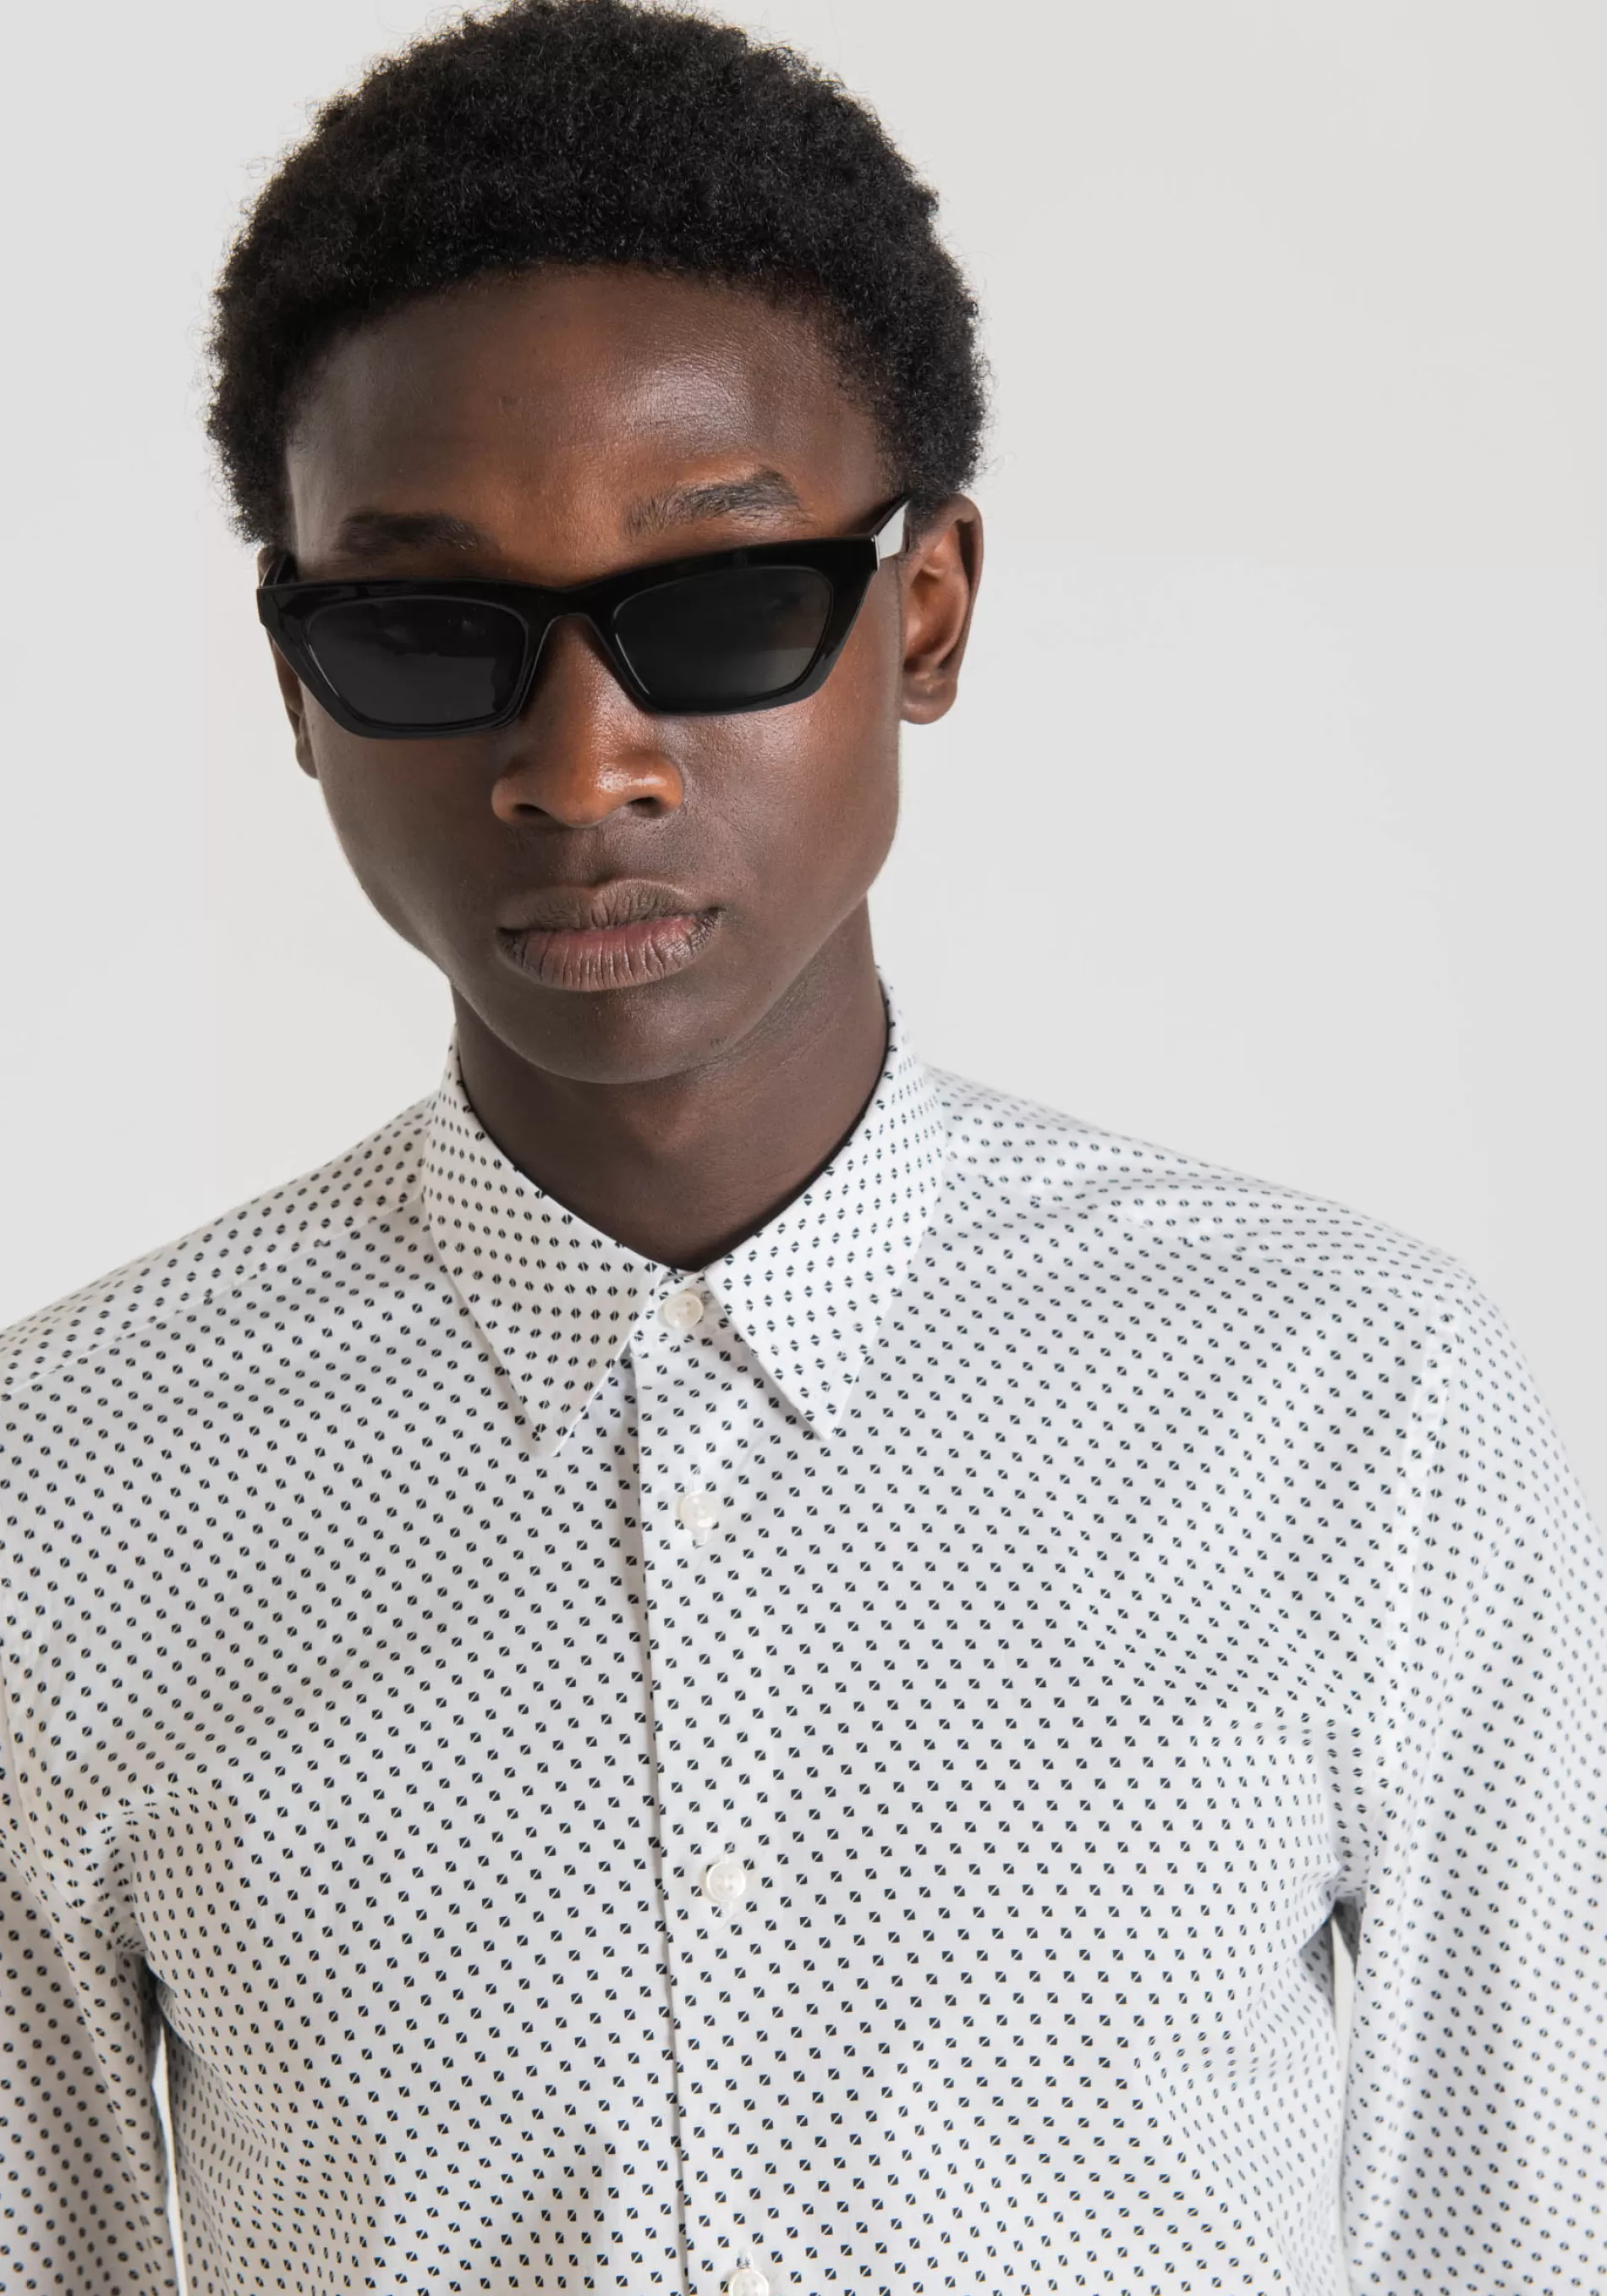 Store "NAPOLI" SLIM FIT SHIRT IN PURE PRINTED COTTON Shirts